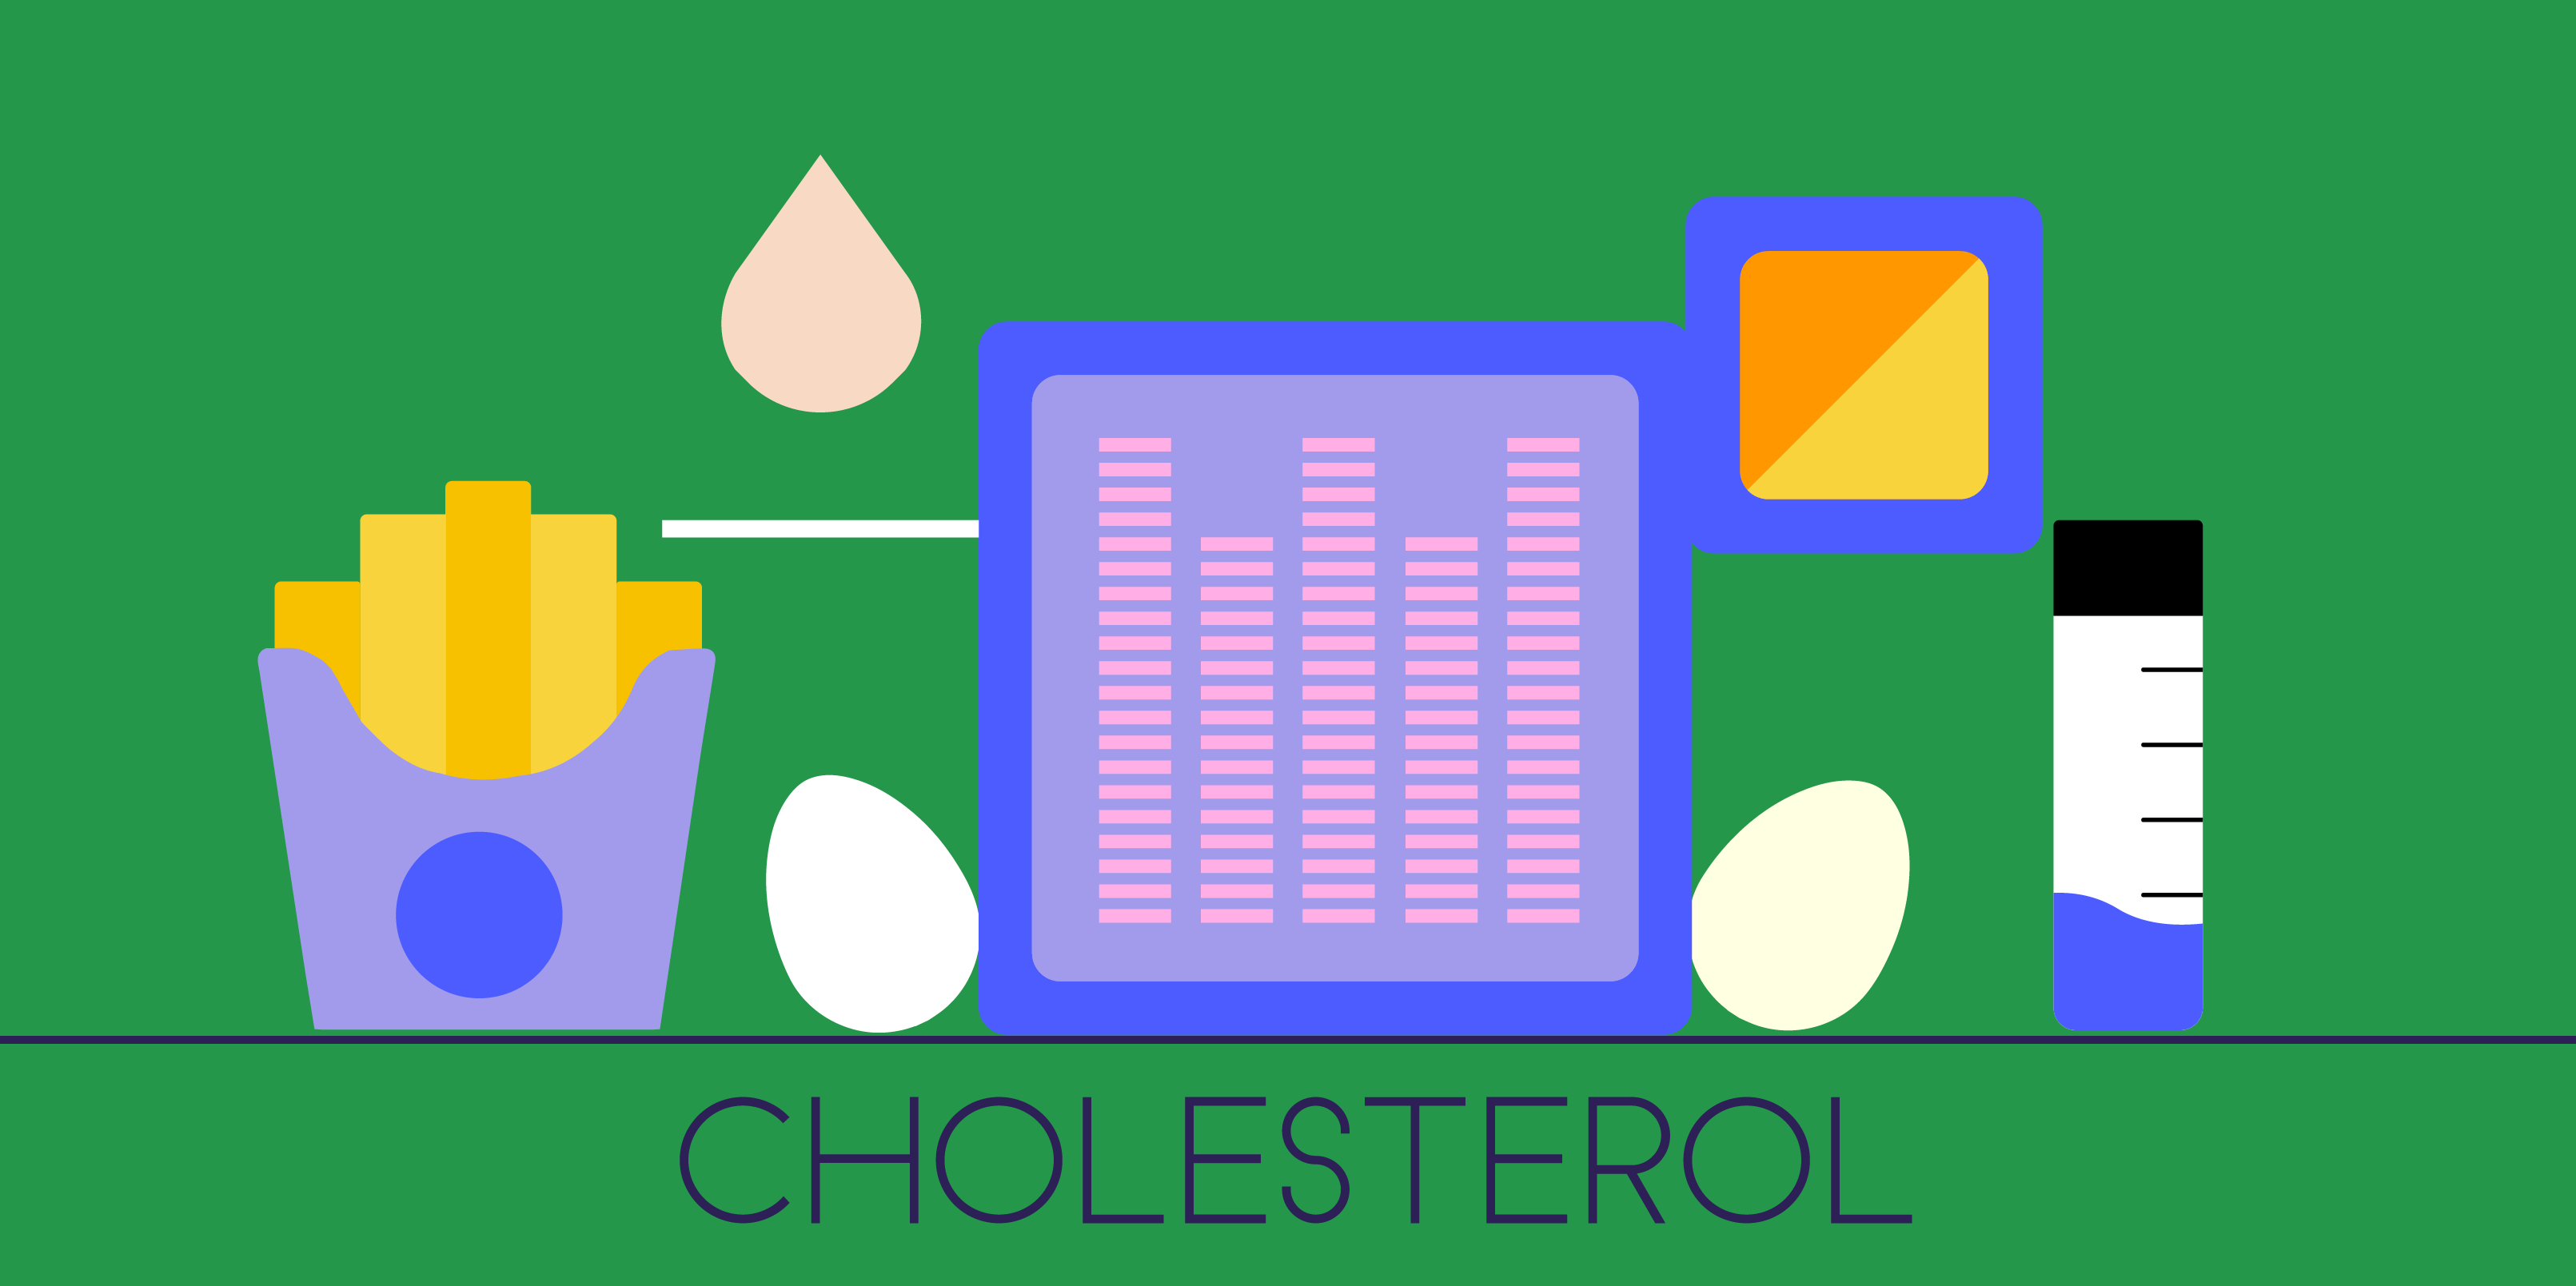 Illustration labeled "Cholesterol" shows french fries and eggs alongside a test tube and test results.